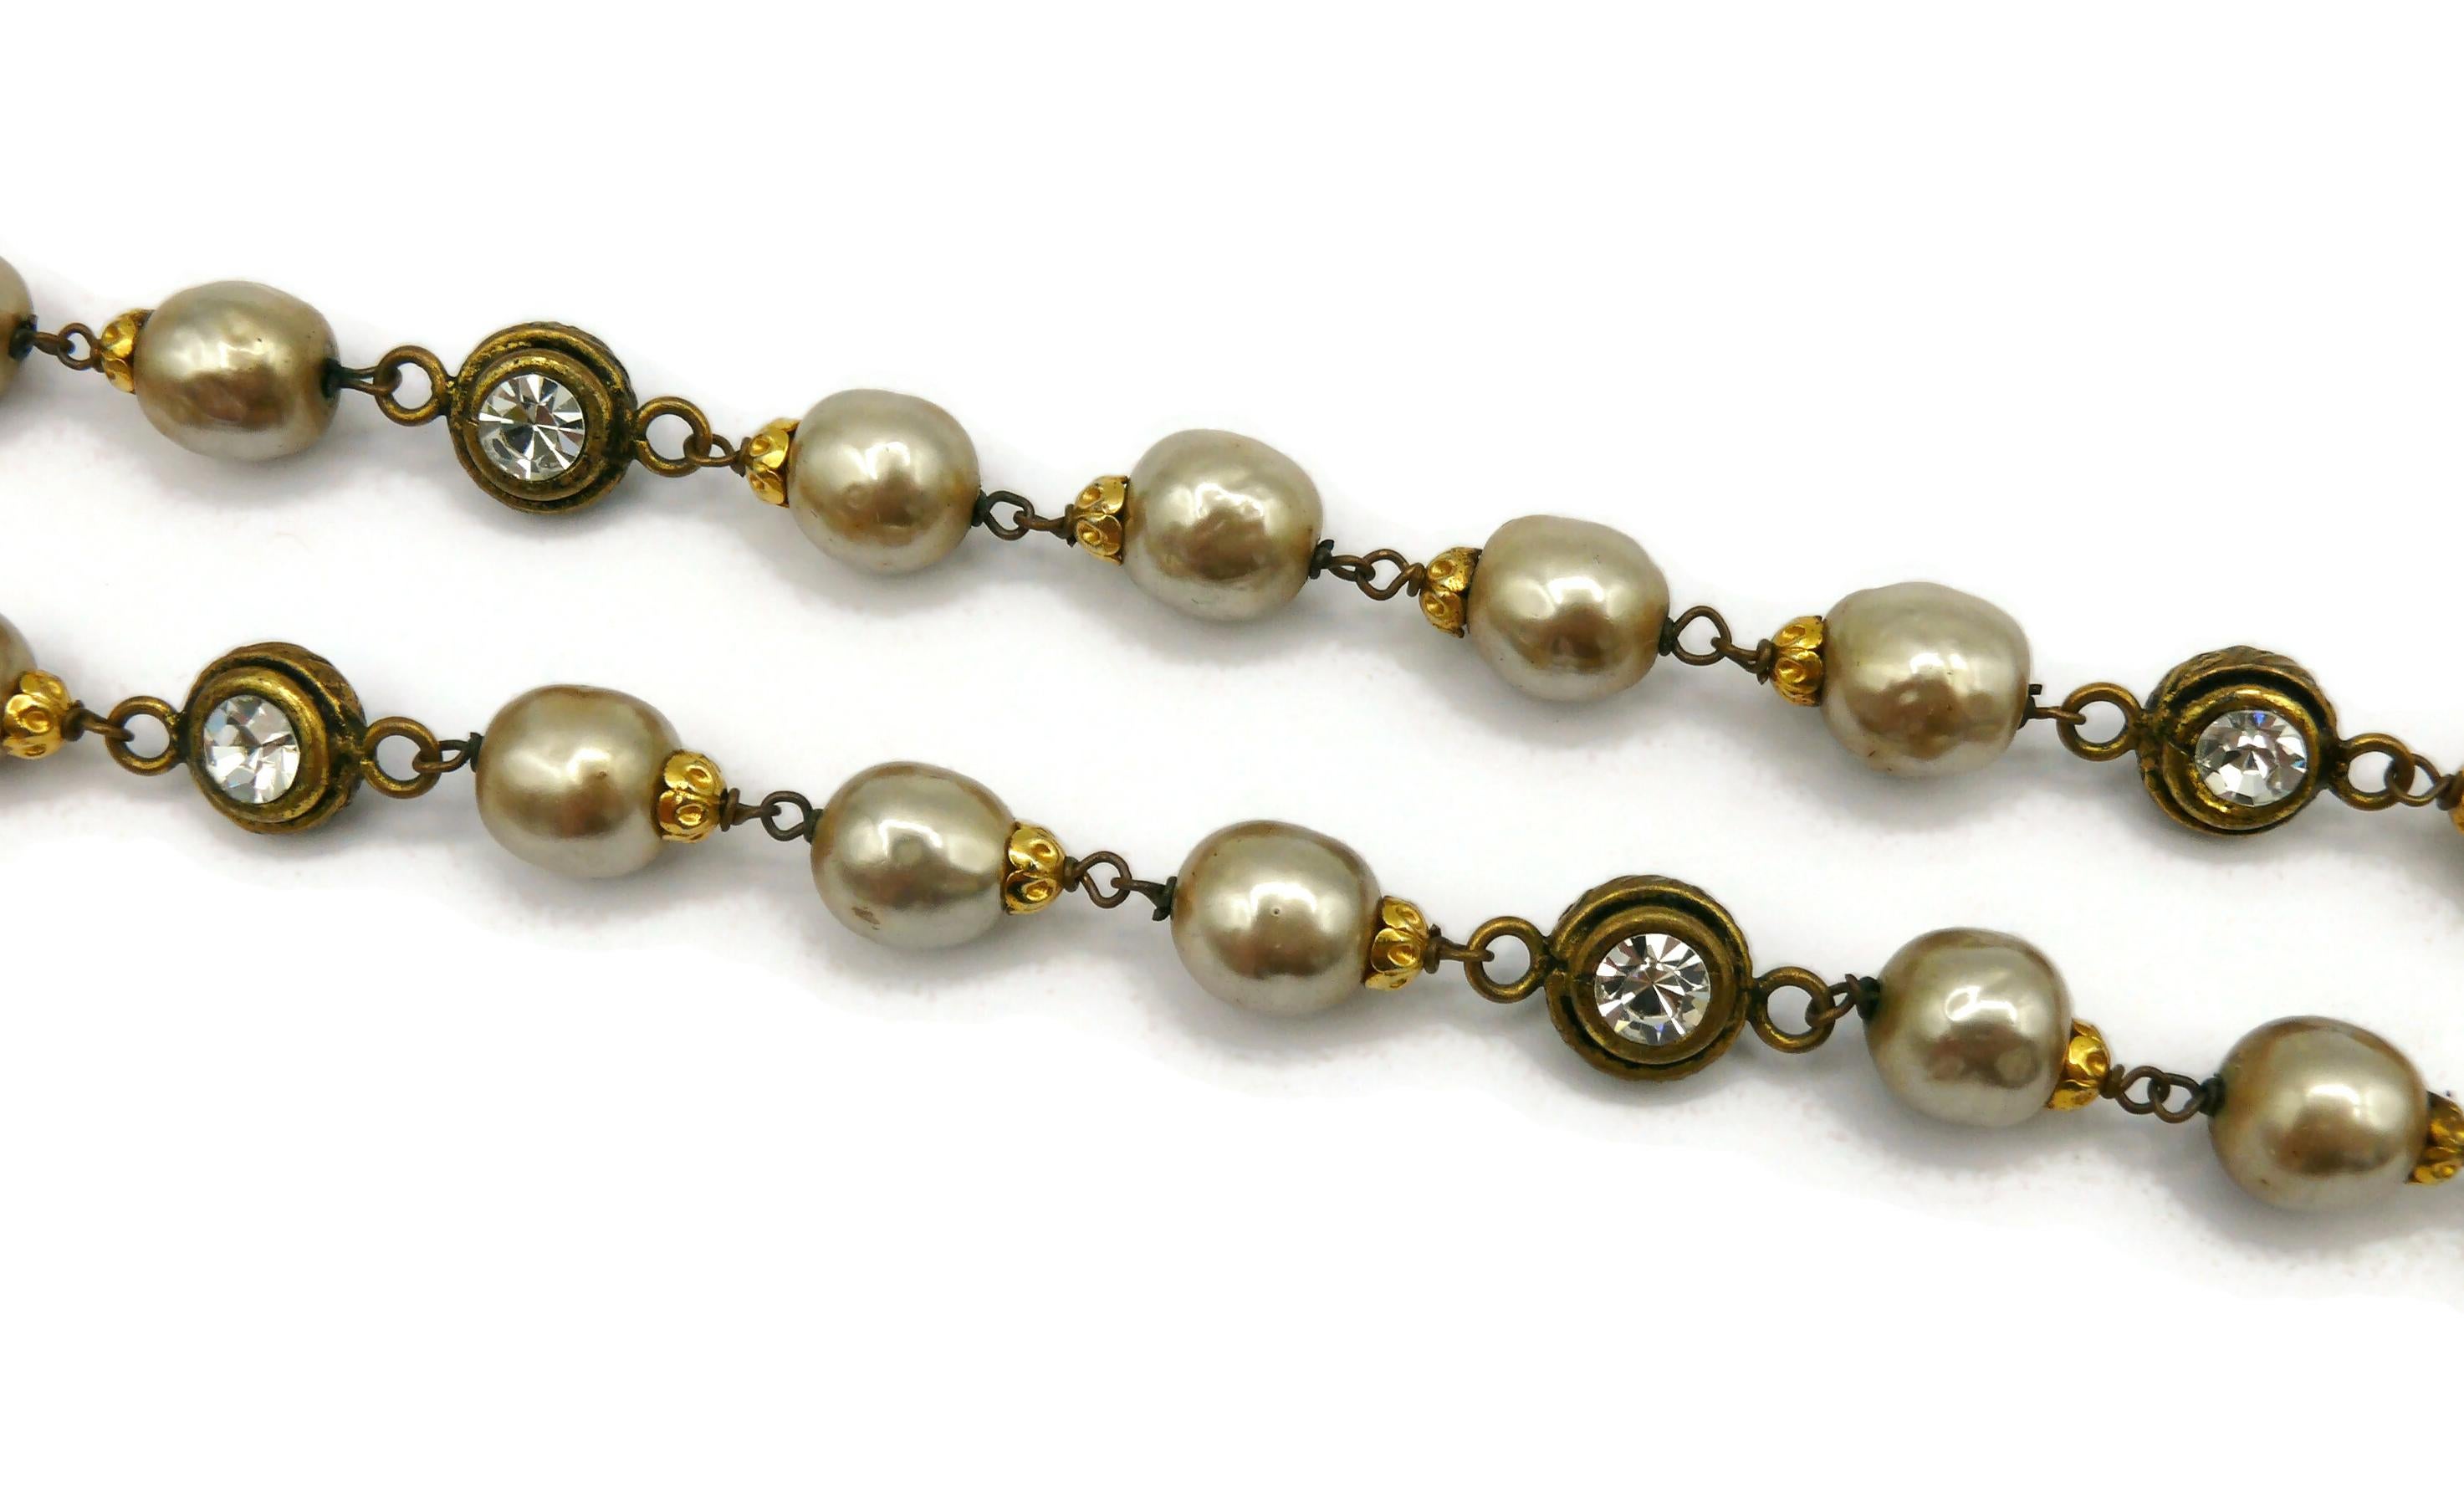 CHANEL Vintage Pearl & Crystal Sautoir Necklace, 1983 For Sale 2